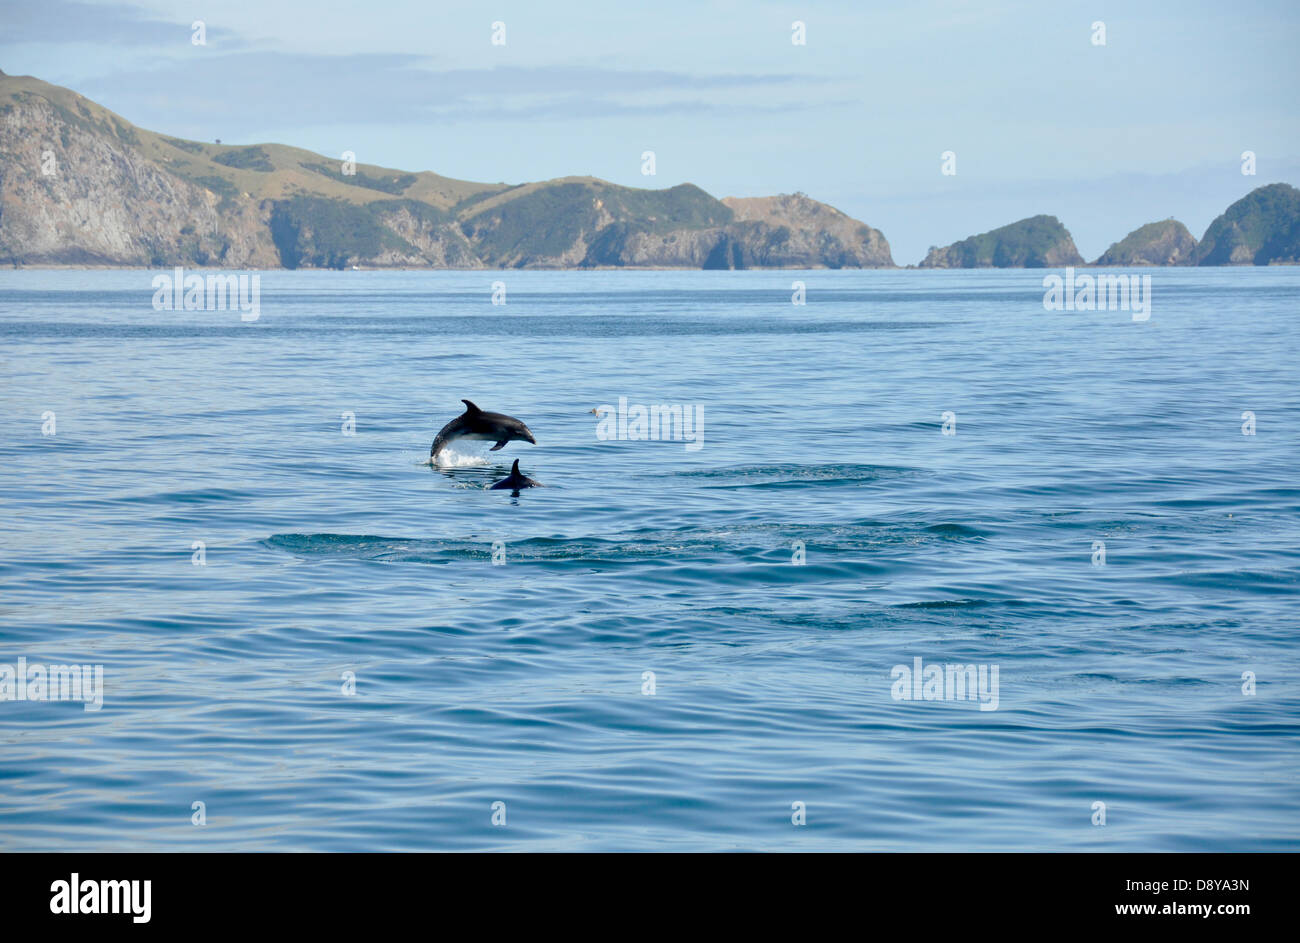 dolphin diving high in the sea with cliffs in background, jumping dolphin Stock Photo